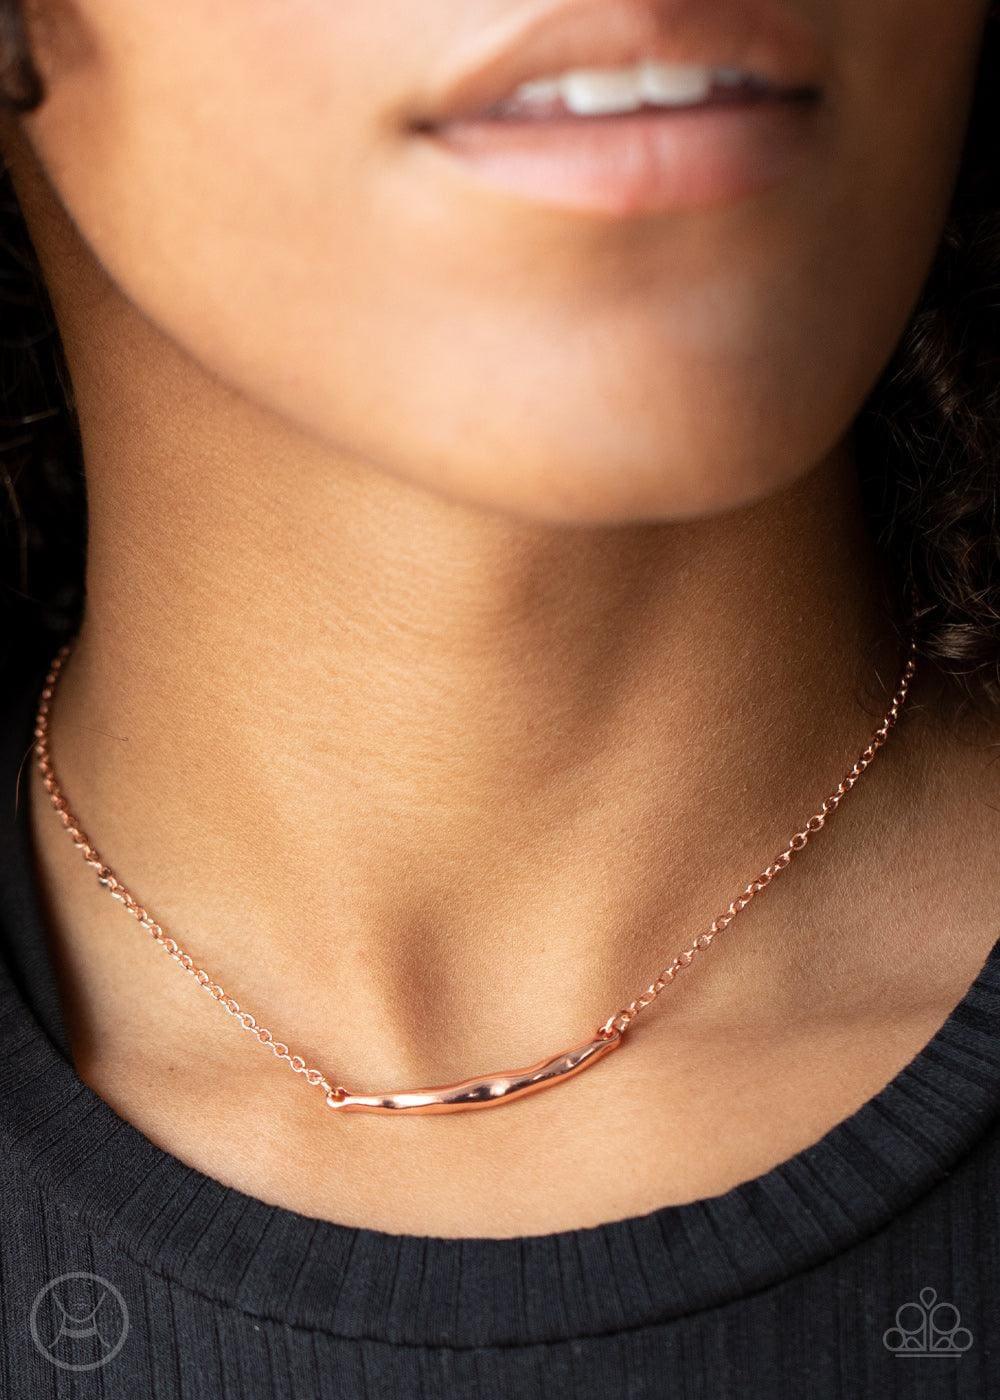 Paparazzi Accessories - Taking It Easy - Copper Choker Necklace - Bling by JessieK